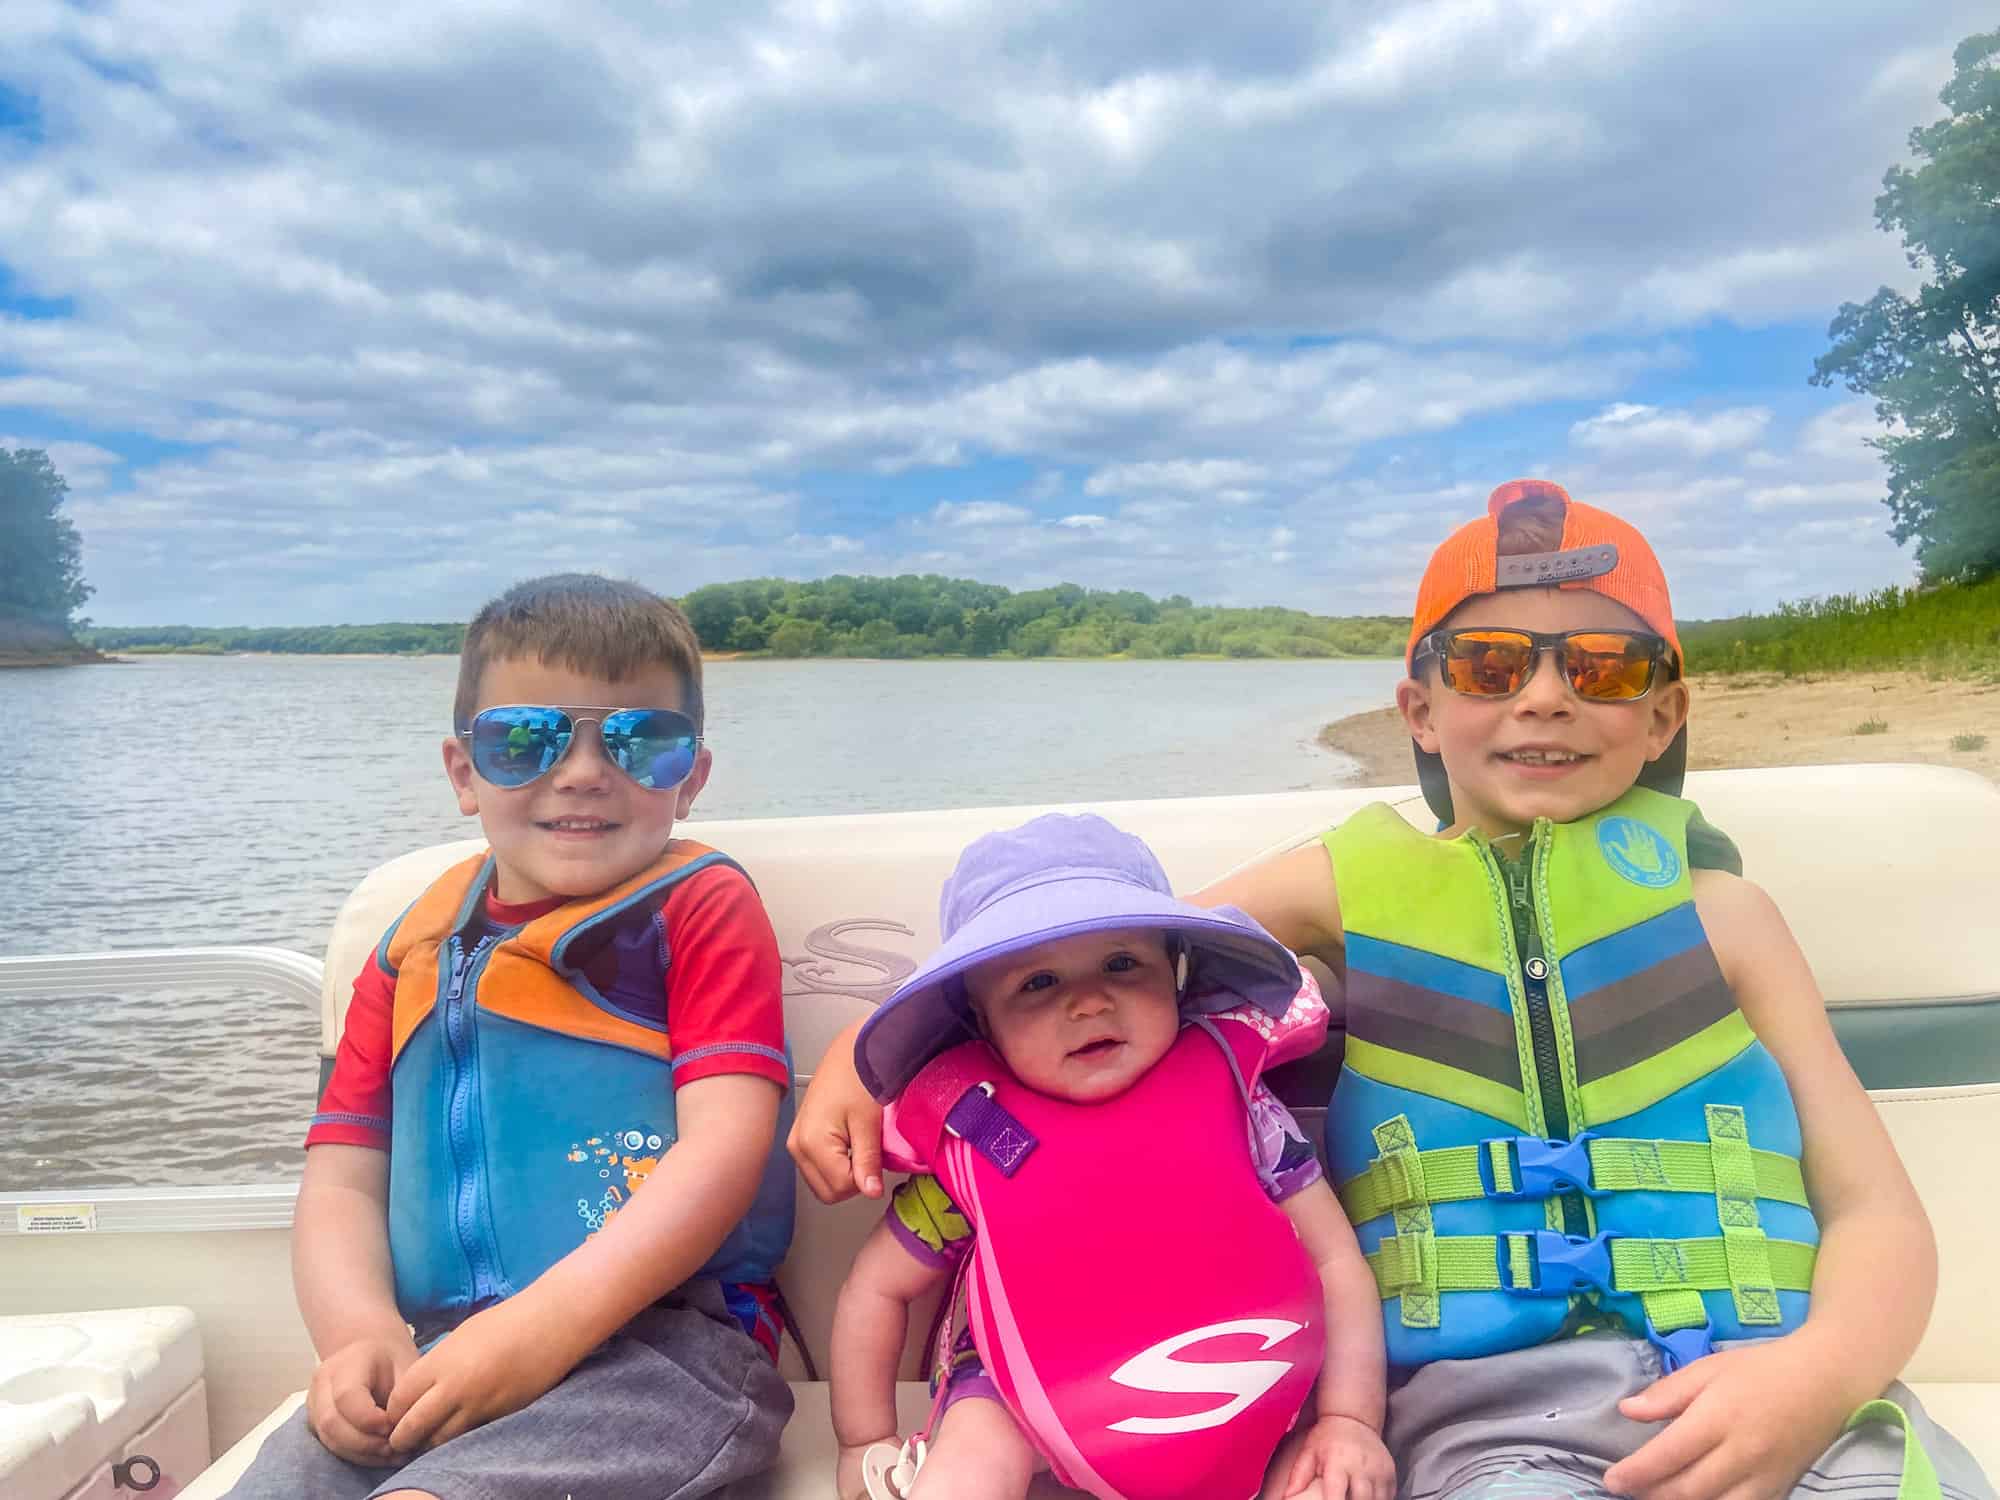 Puddle Jumper Life Jackets: Essential Guide for Kids' Safety - Seamagazine